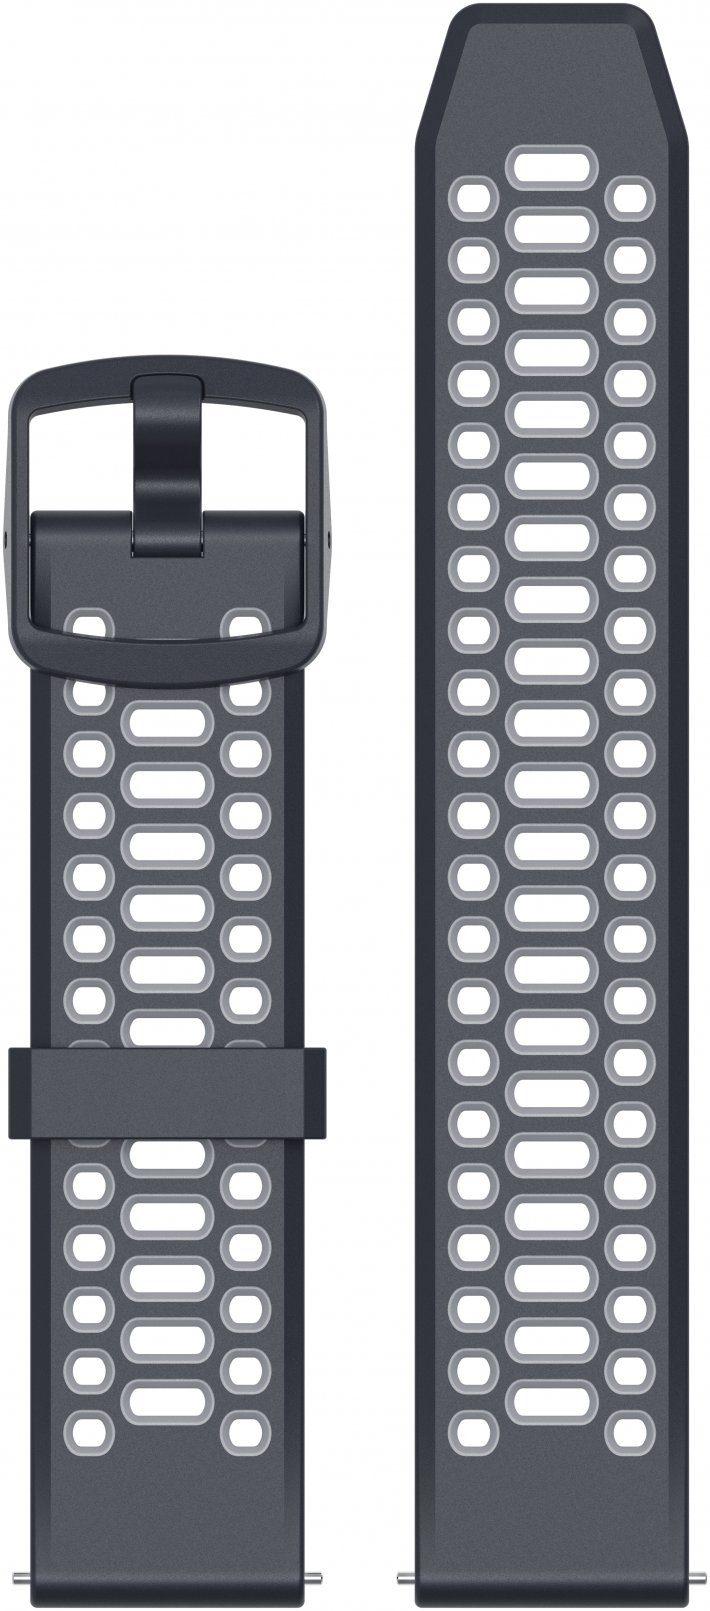 Silicone Watchband For Coros Pace 2/apex Pro - Infinite Stratos 2 Compatible